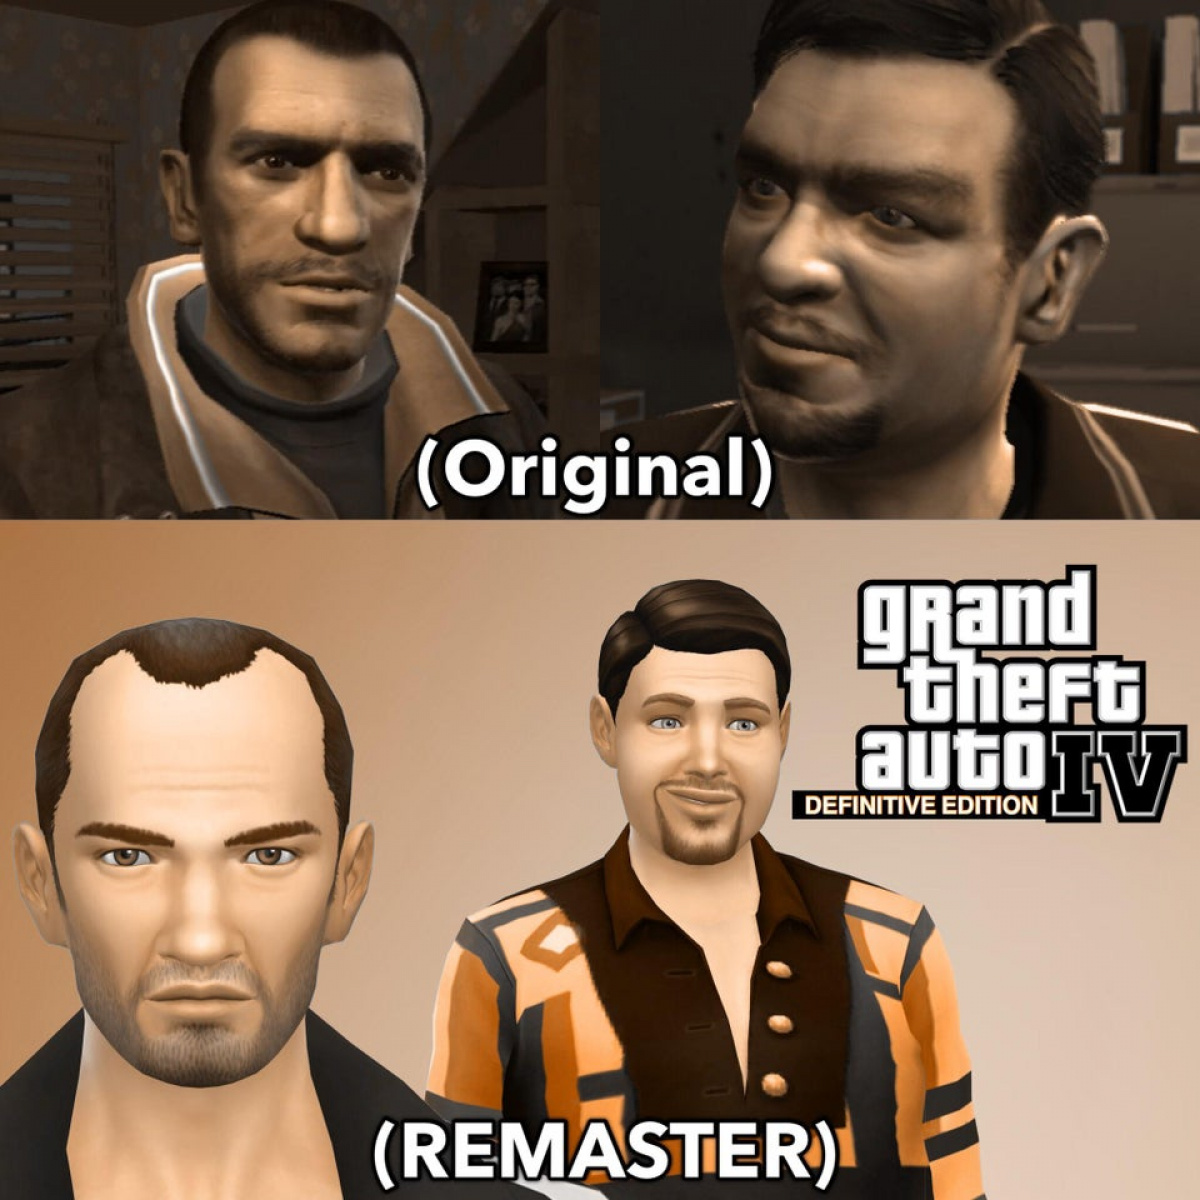 Too much polygons on this GTA: The Trilogy nut, ghost bridge and steroids  for CJ — greatest